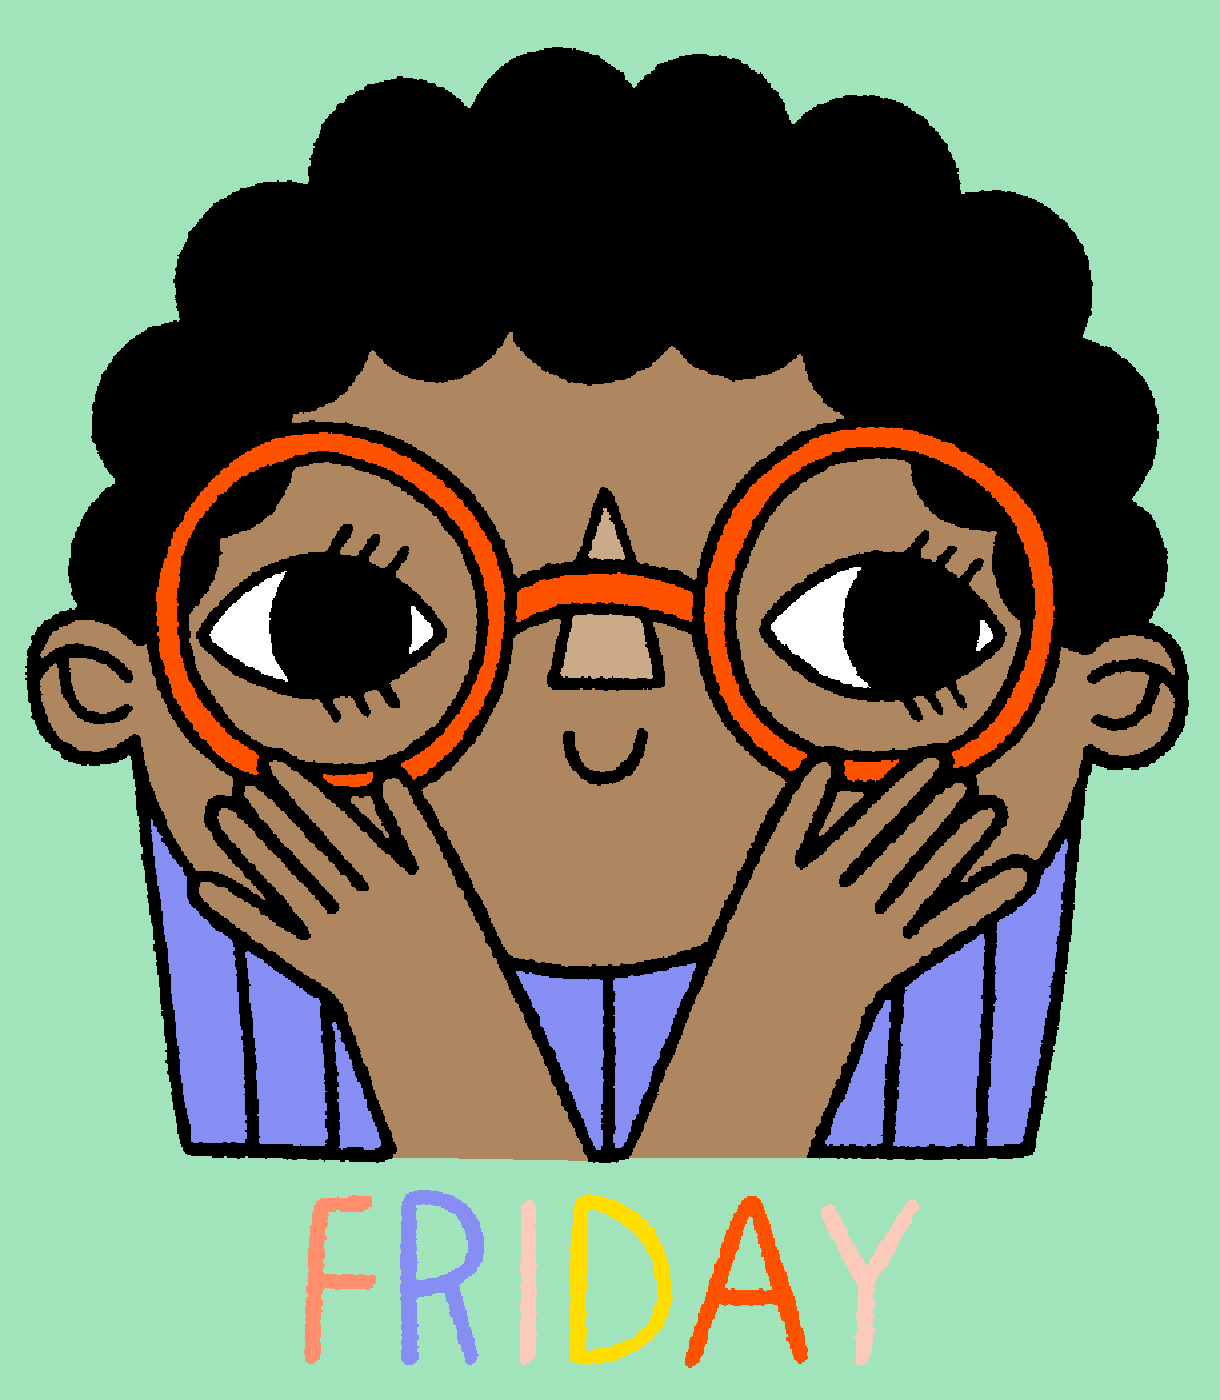 Illustrated gif. A child with short curly hair and large round glasses rests holds opposite hands up to their cheeks and glances to the side, then winks. Text, "Friday."